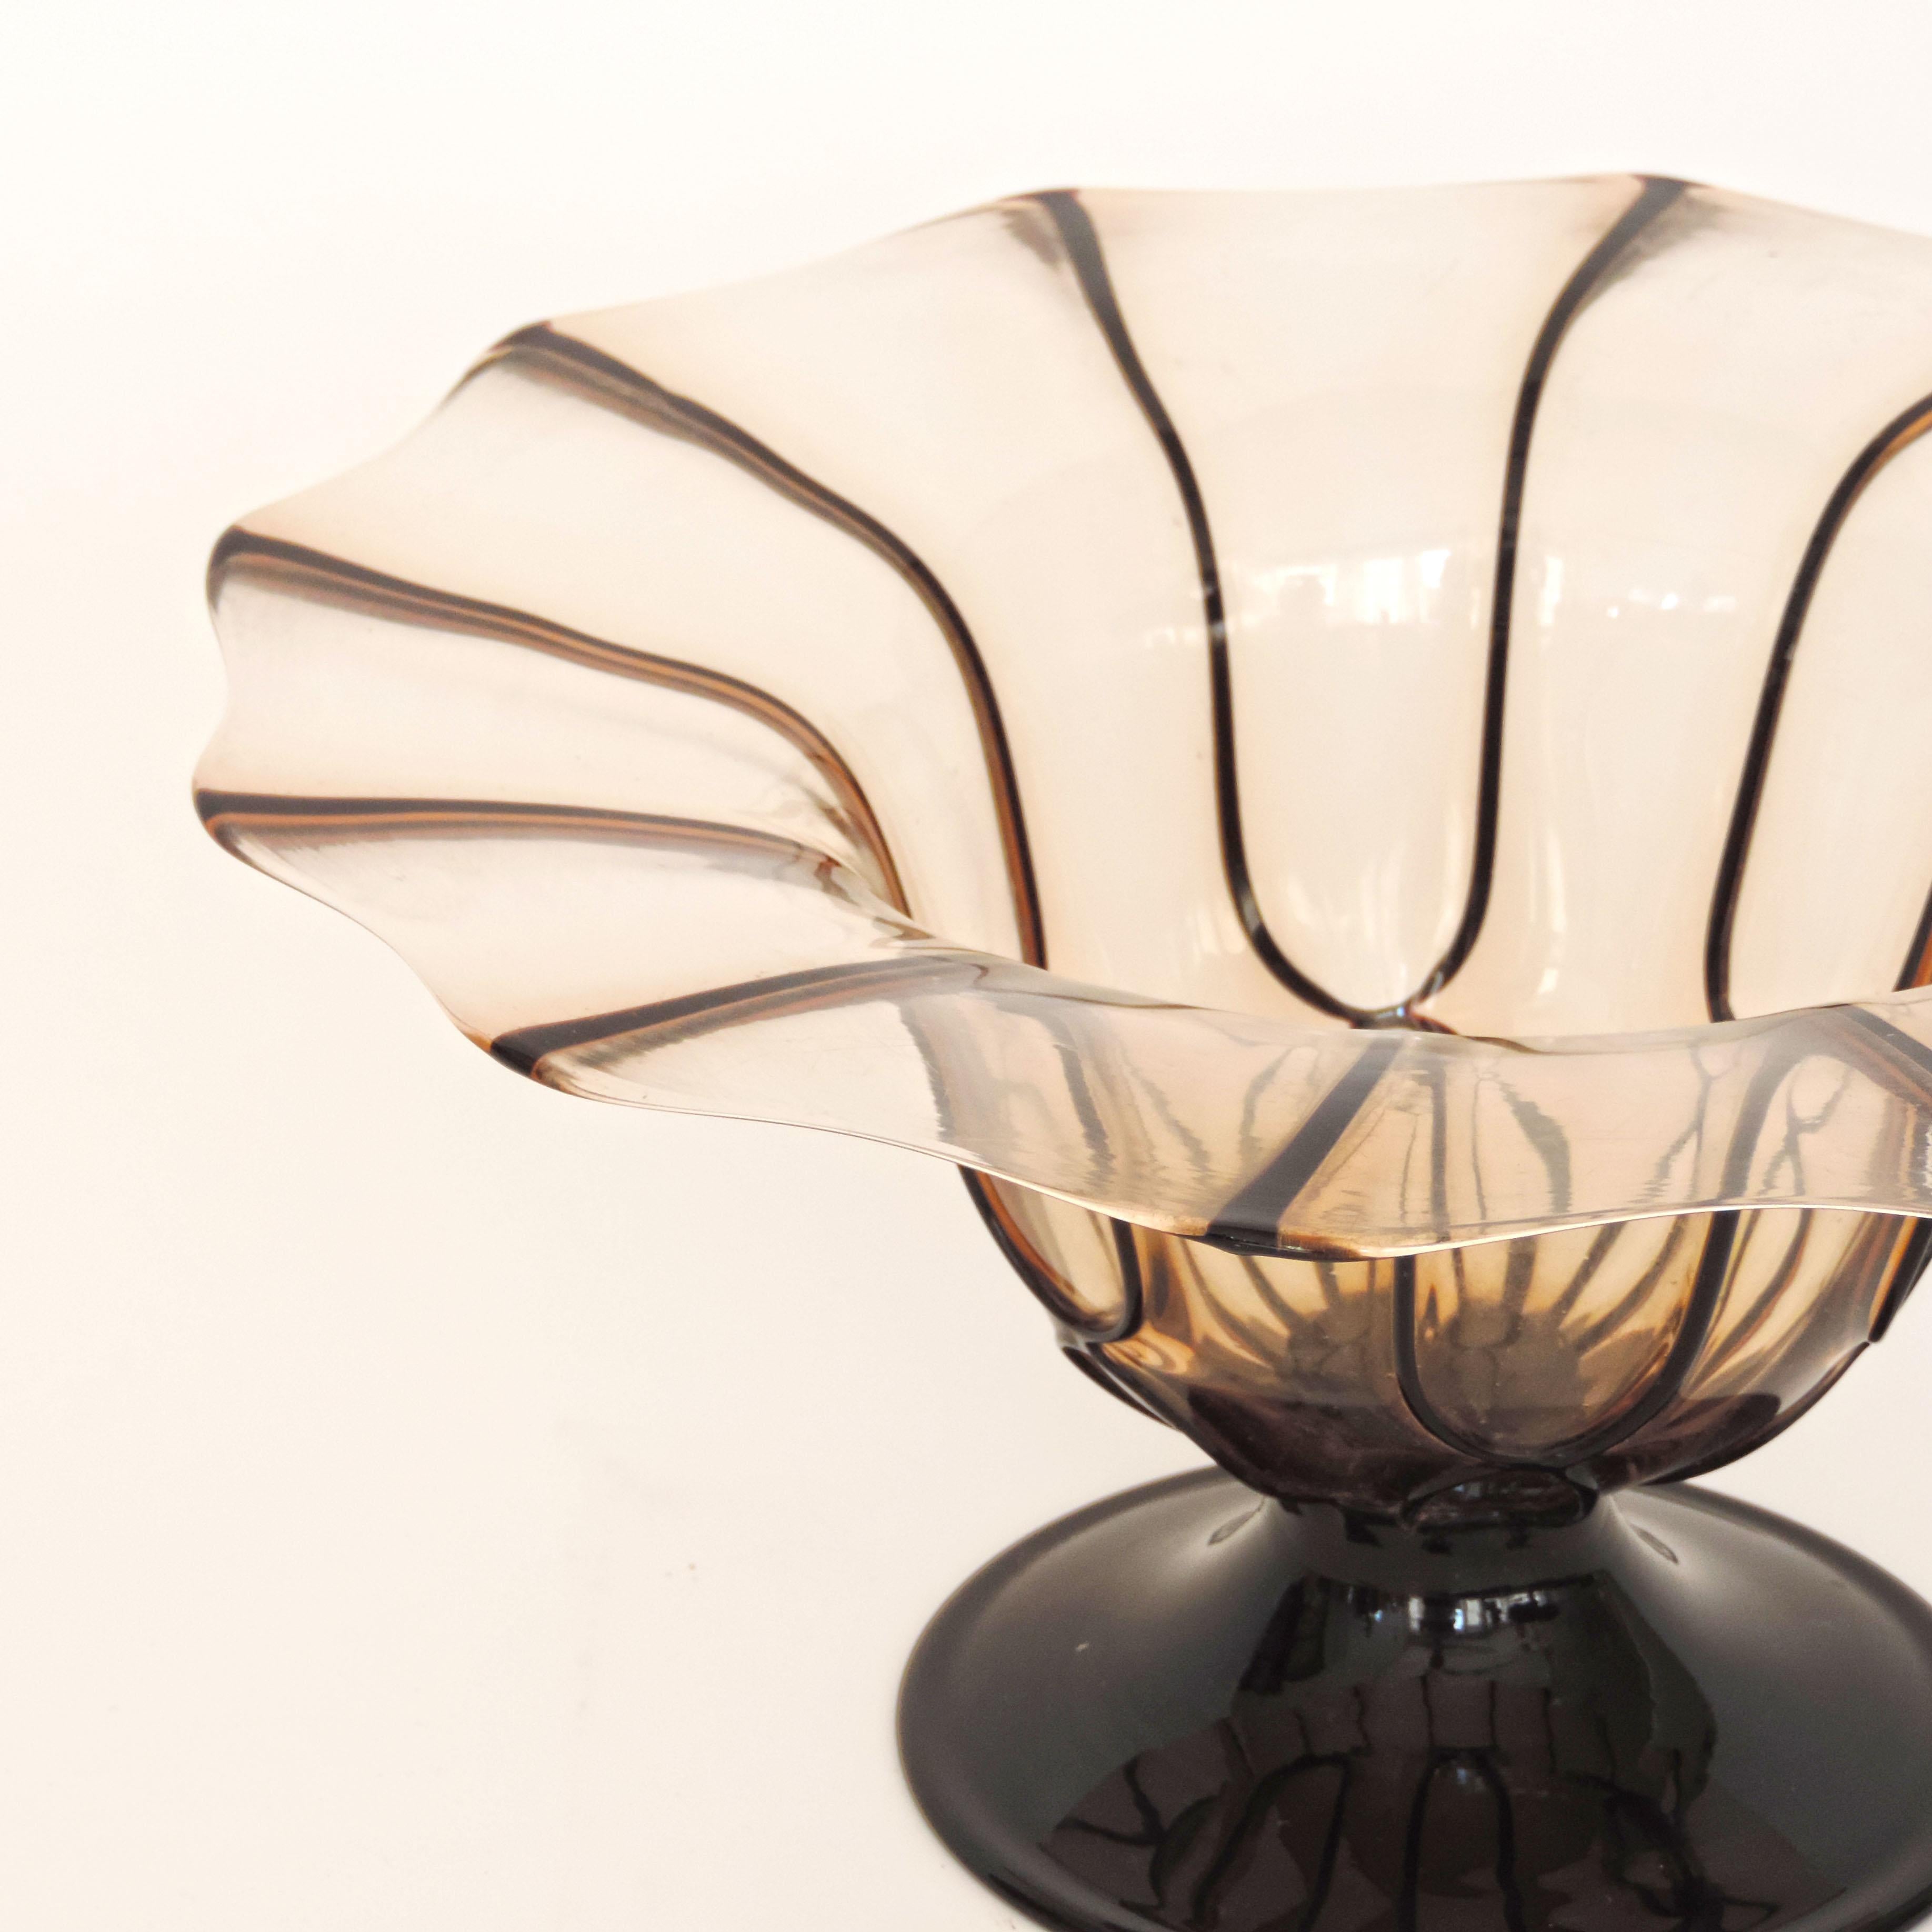 Italian Large Pauly Murano Glass Vase, Italy, 1930s For Sale